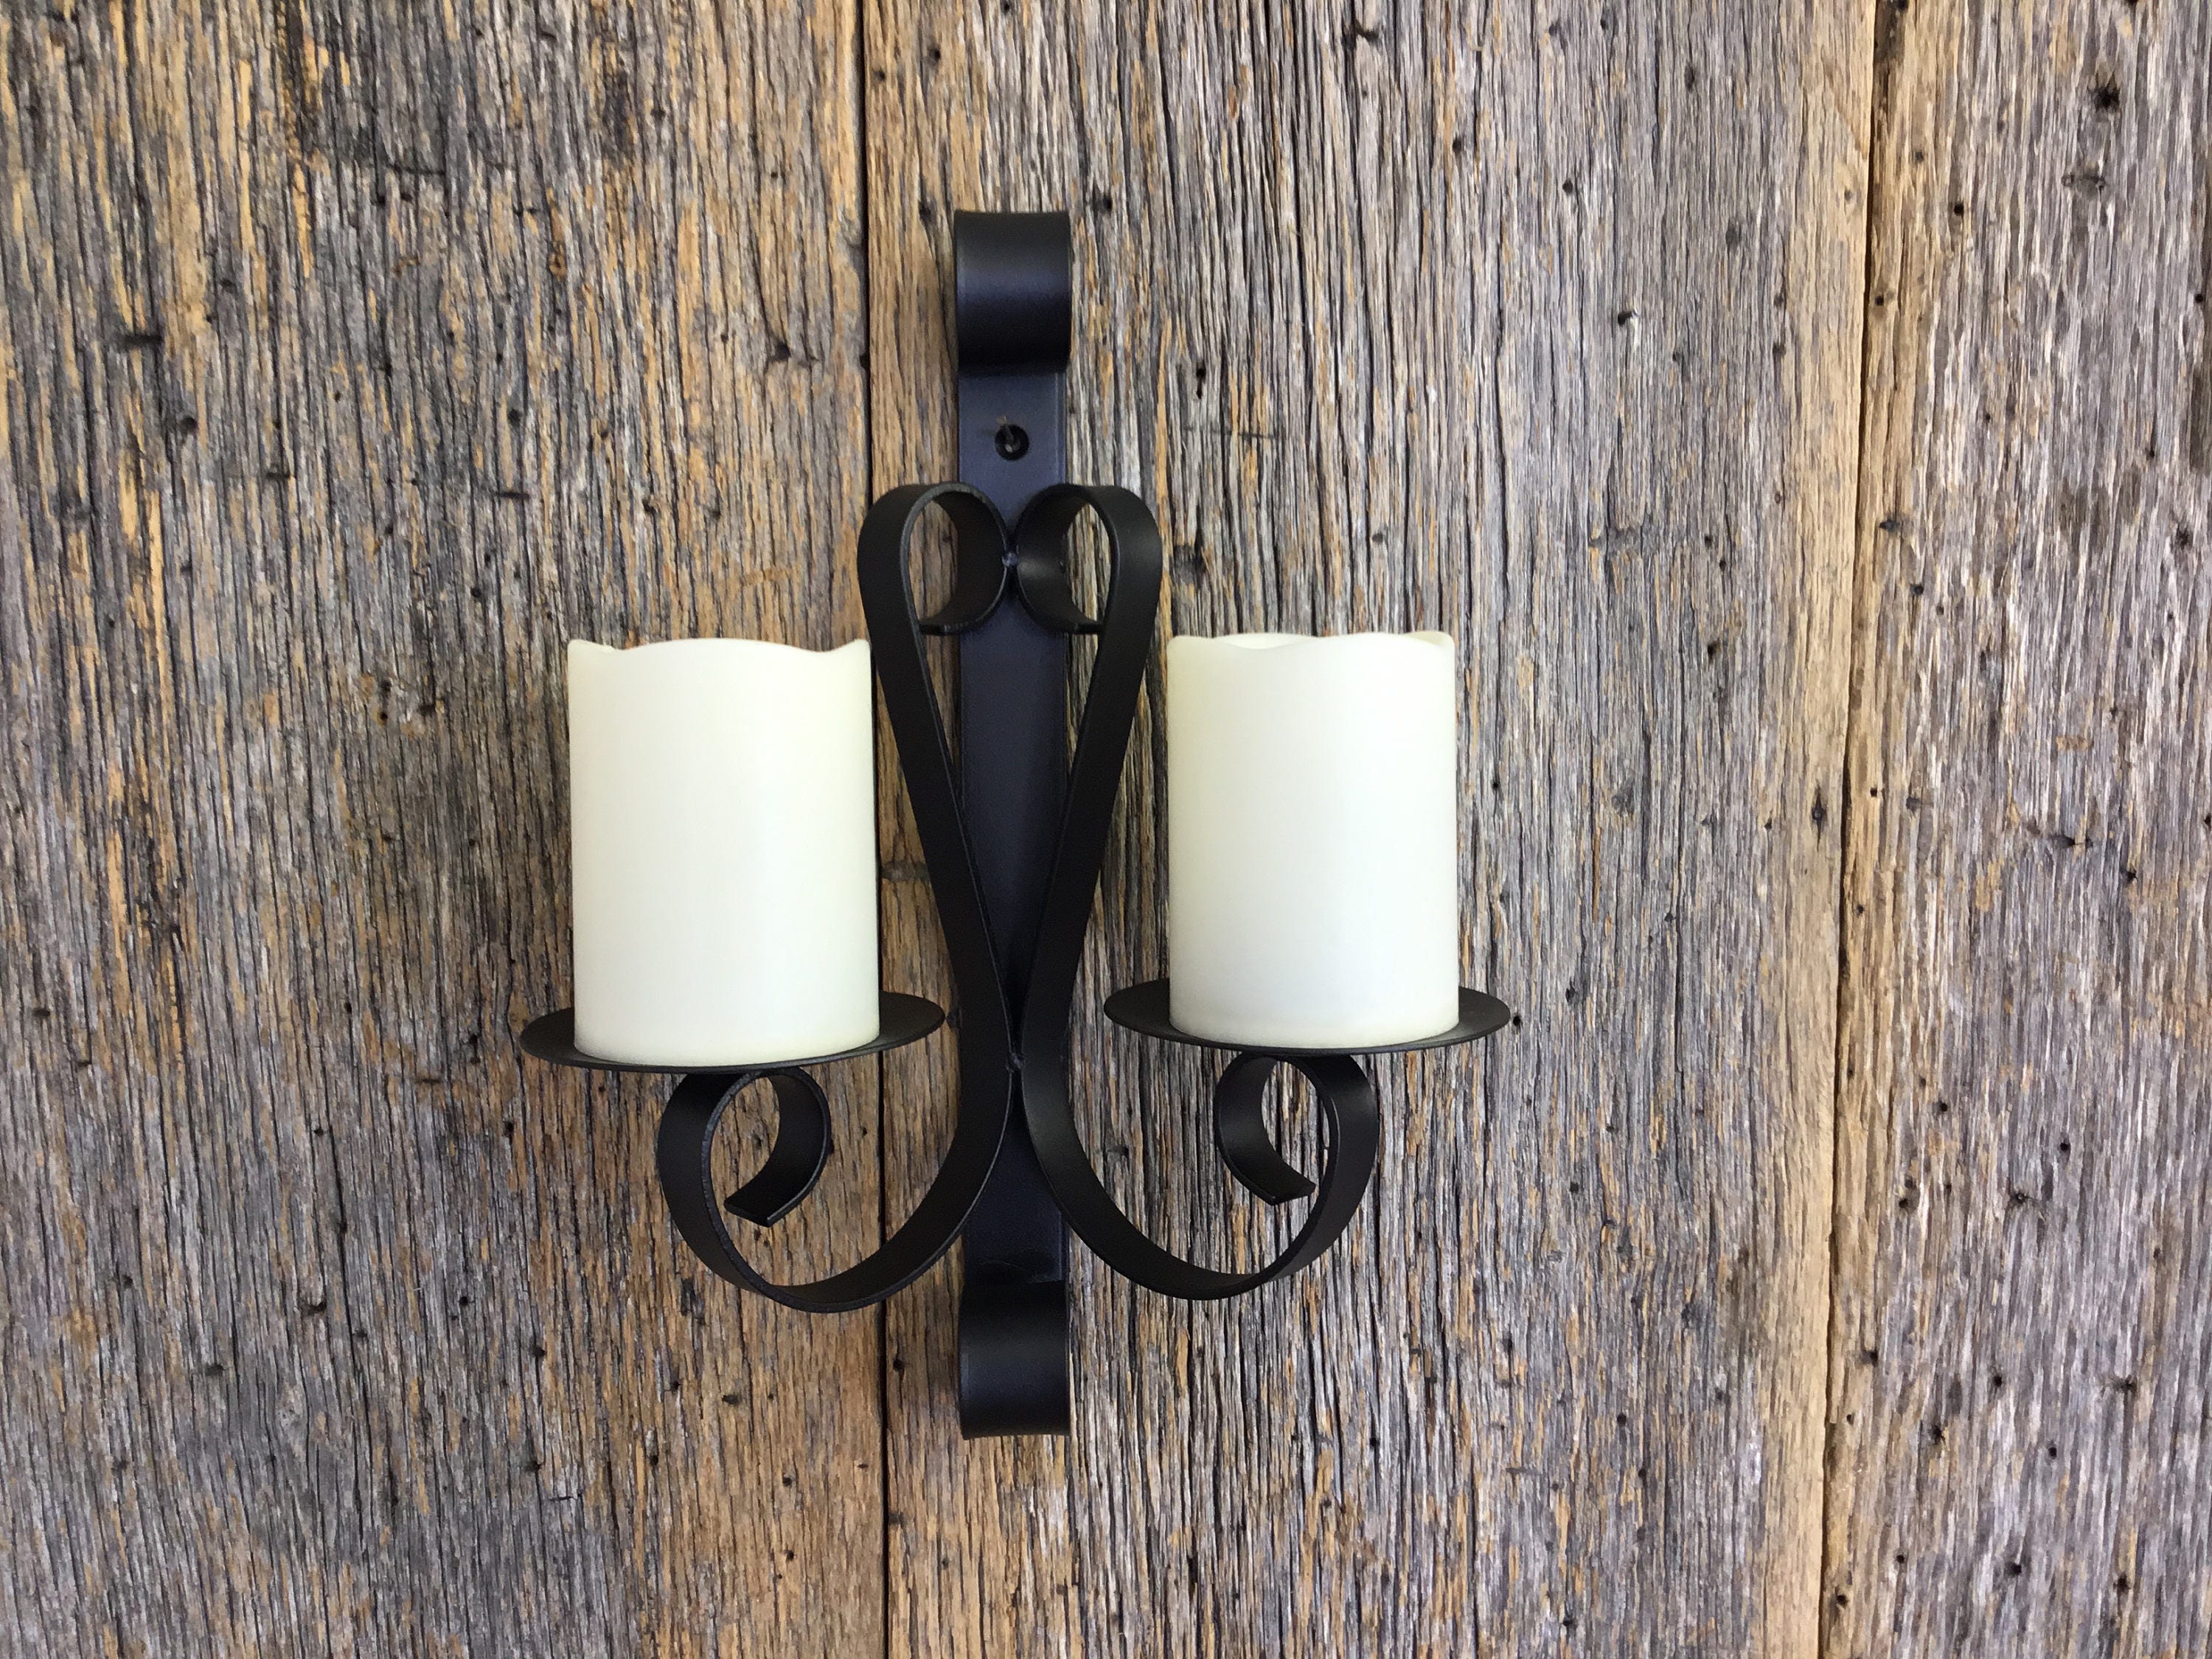 Metal Candle Wall Sconce for Pillar Candles, Rustic Black Wrought Iron  Candle Holder. -  Canada